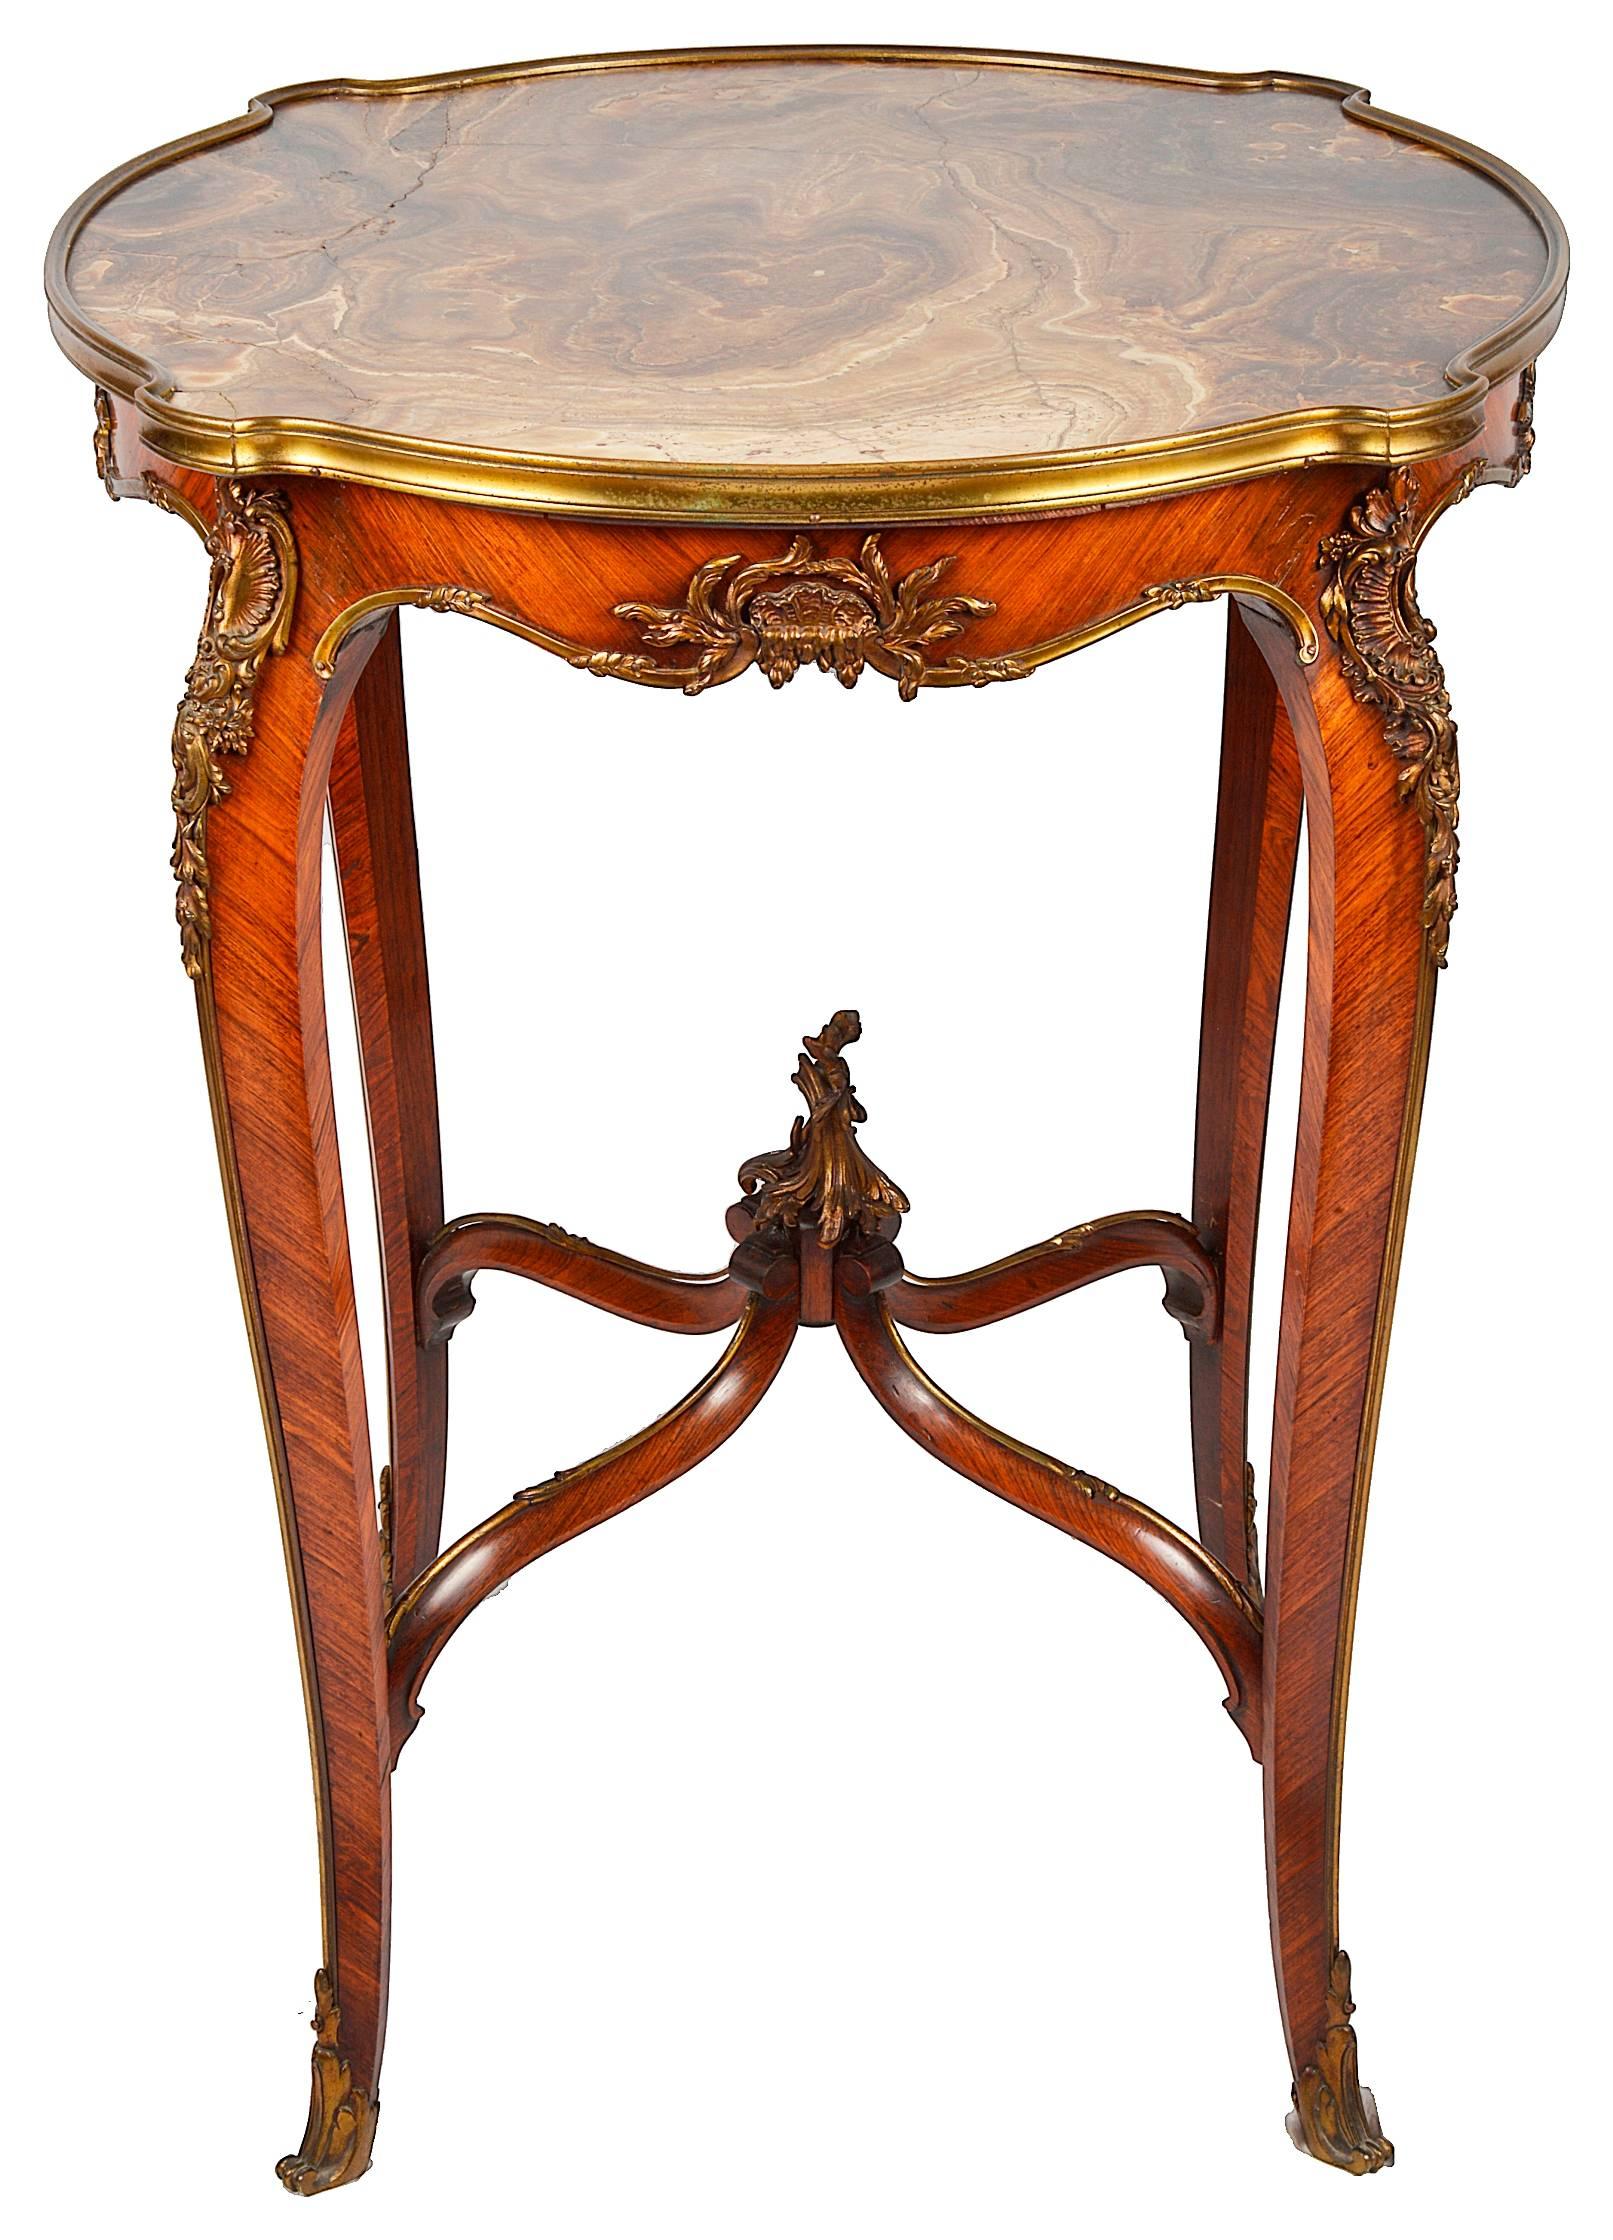 A very good quality French Louis XVI style Gueridon having an inset quarts marble top, gilded ormolu mounts, raised on elegant cabriole legs and united by a stretcher beneath.
In the manner of Linke.